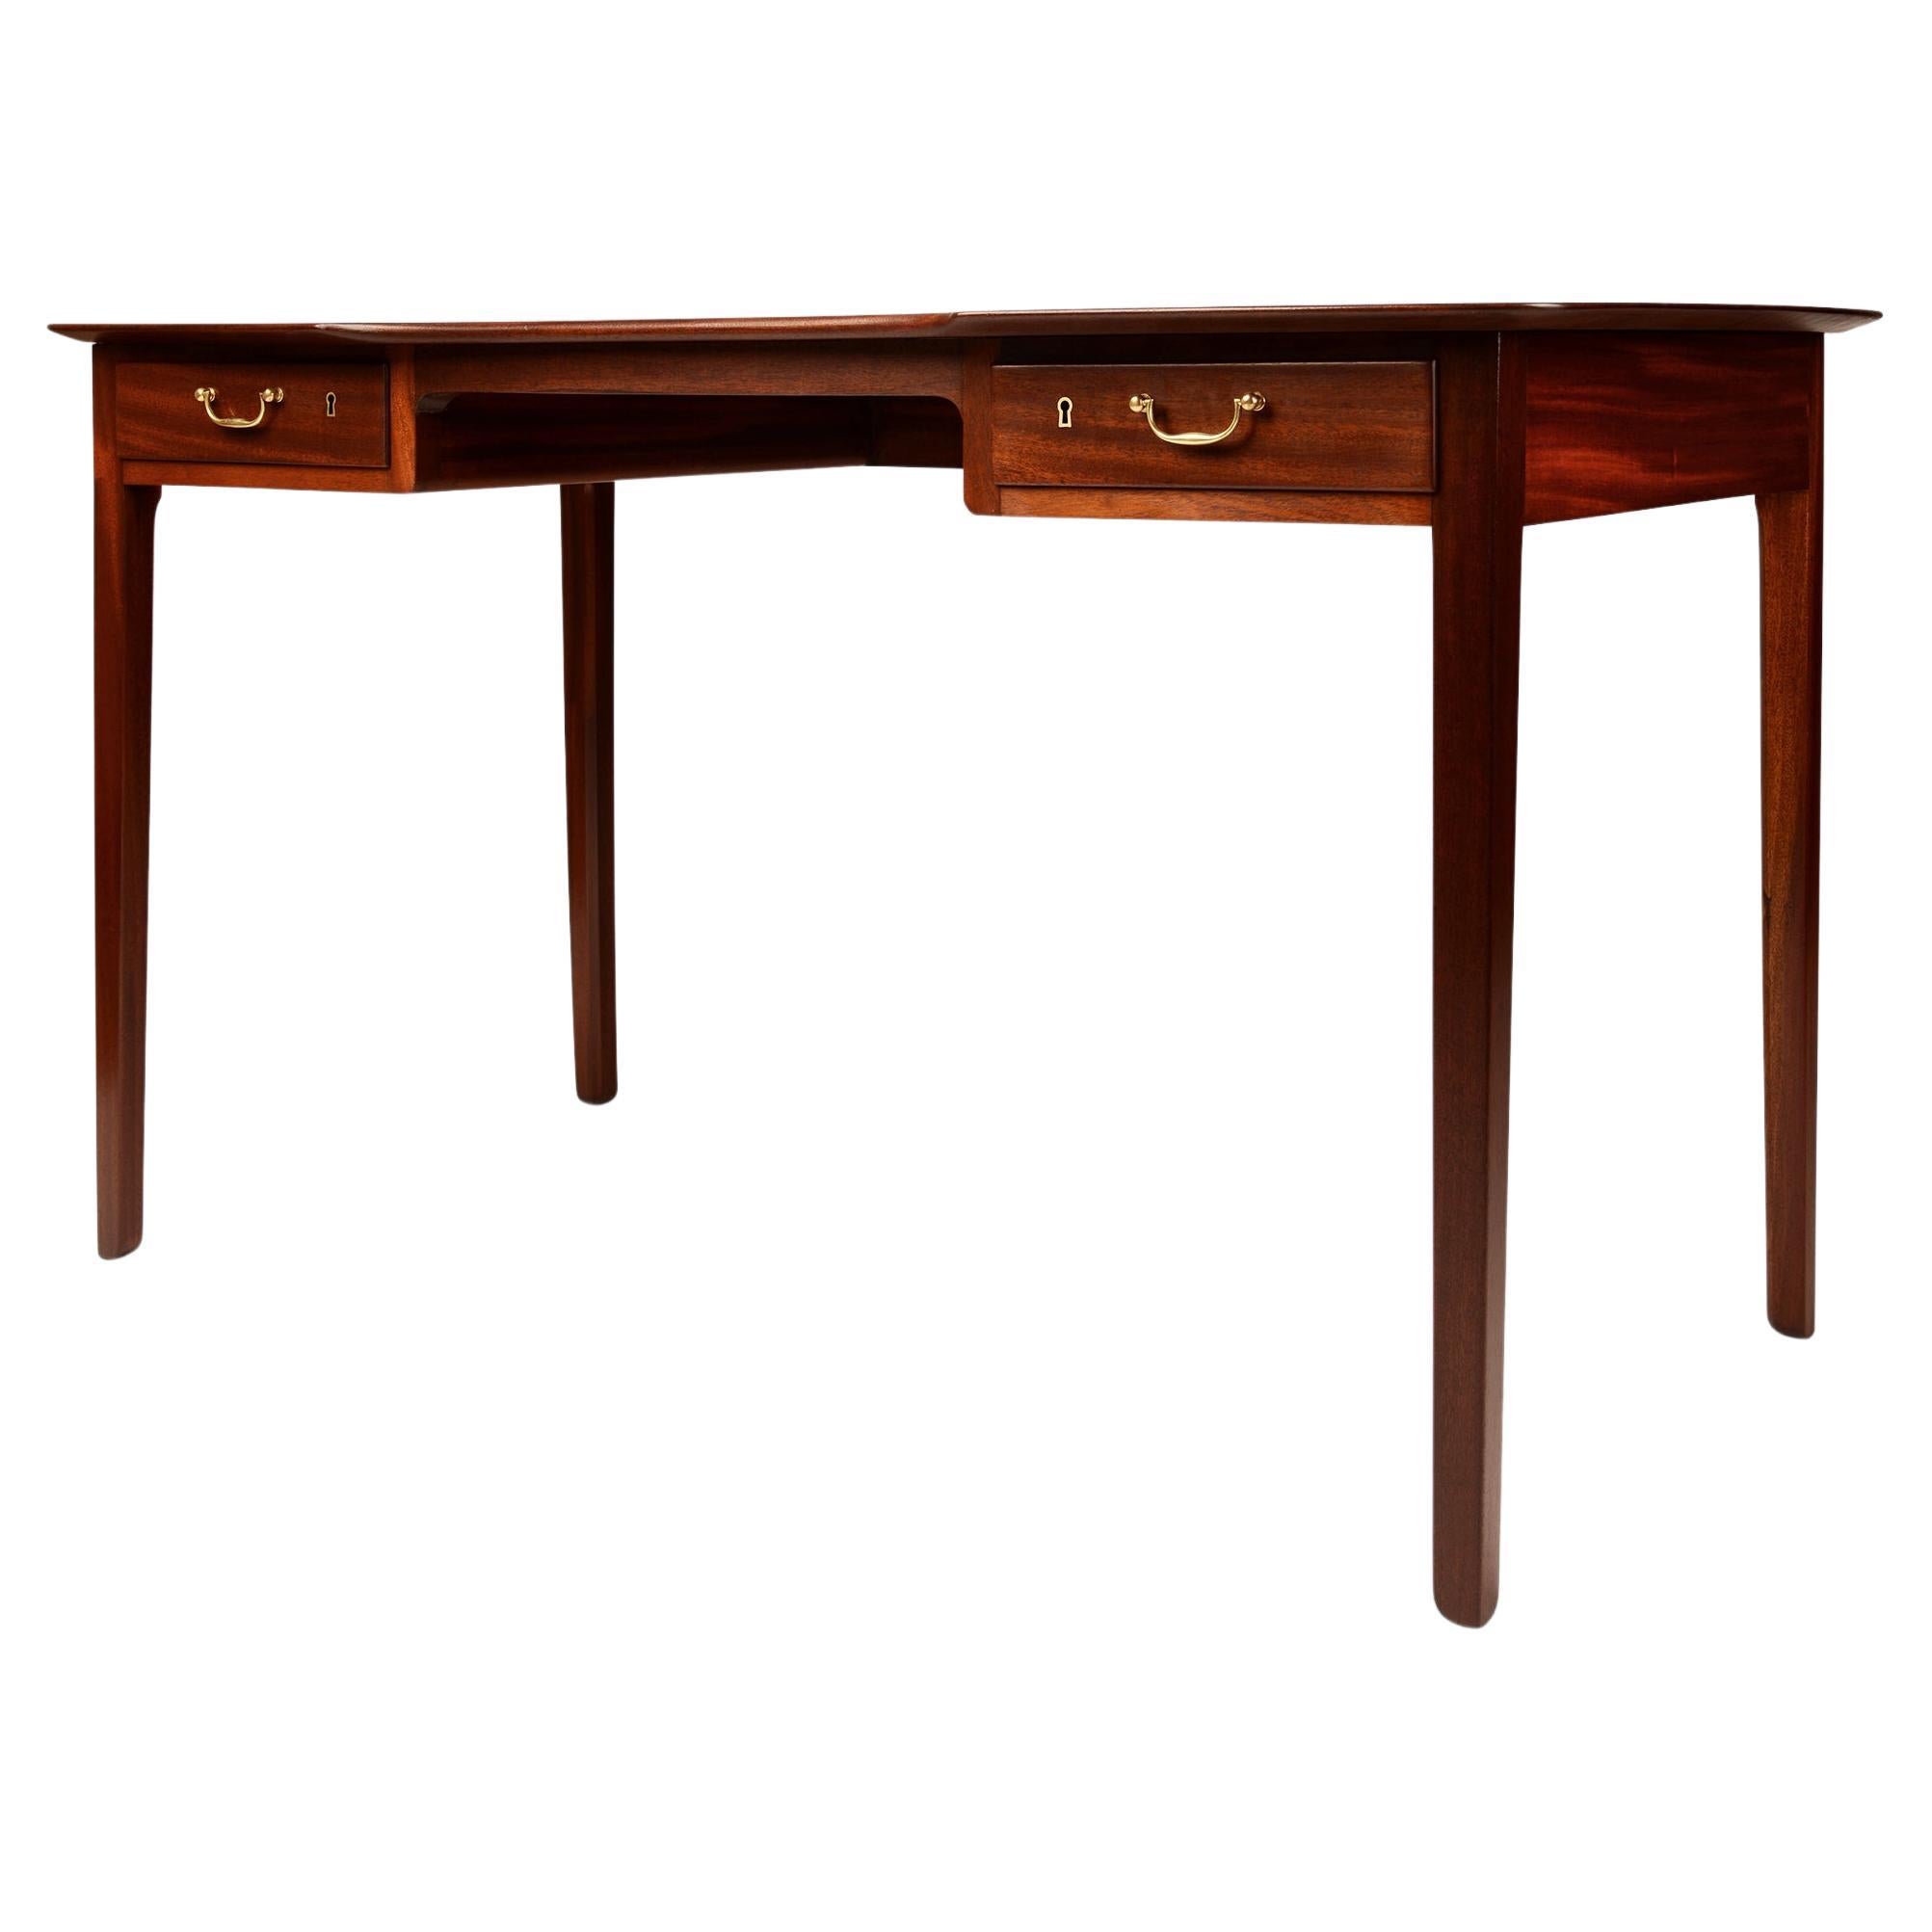 Smaller Danish Lady’s writing desk in mahogany with drawers and brass details For Sale